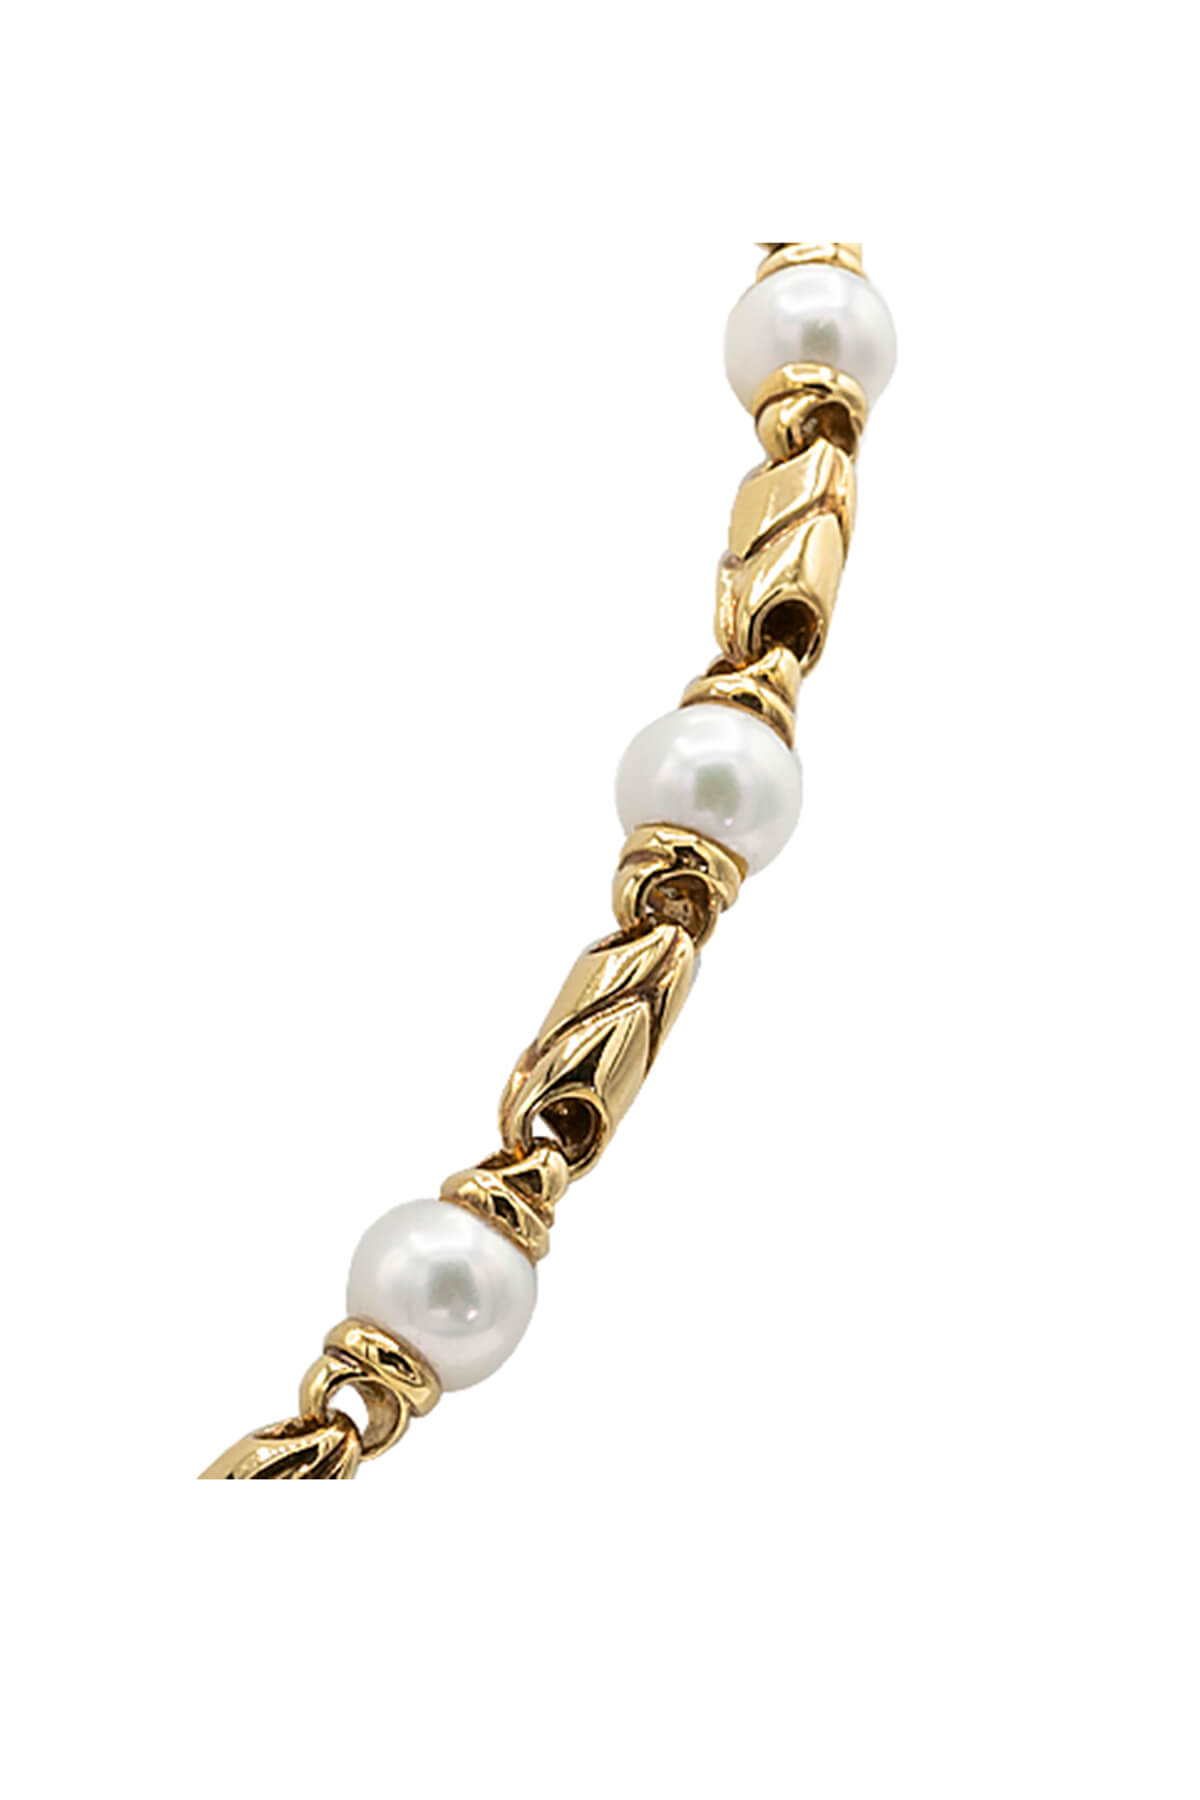 Bvlgari Pearl & Gold Necklace